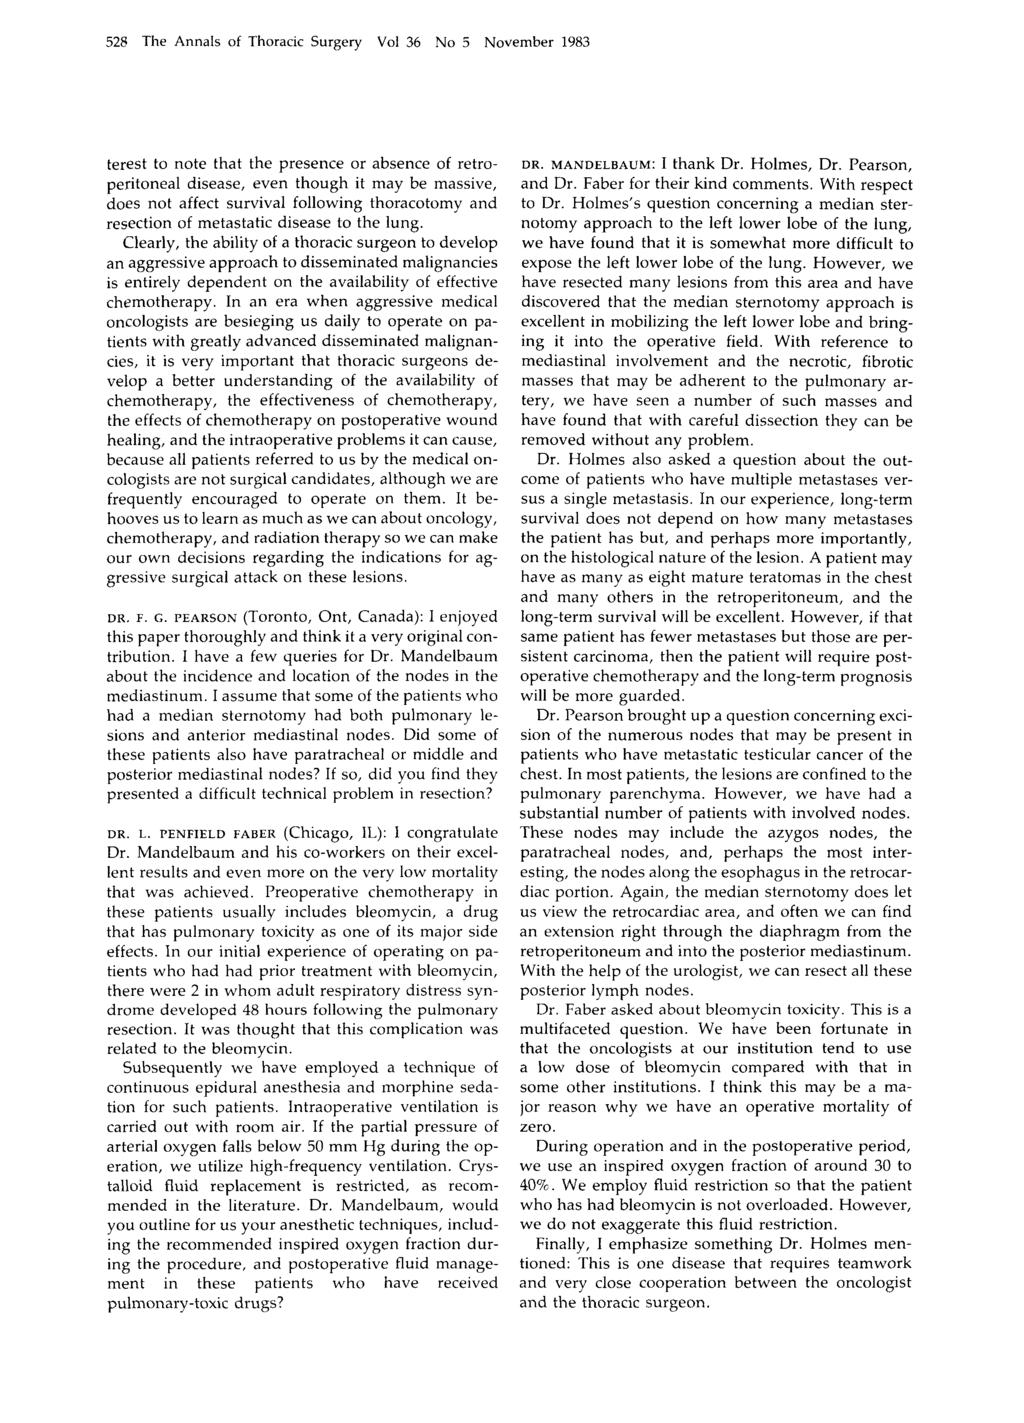 528 The Annals of Thoracic Surgery Vol 36 No 5 November 1983 terest to note that the presence or absence of retroperitoneal disease, even though it may be massive, does not affect survival following